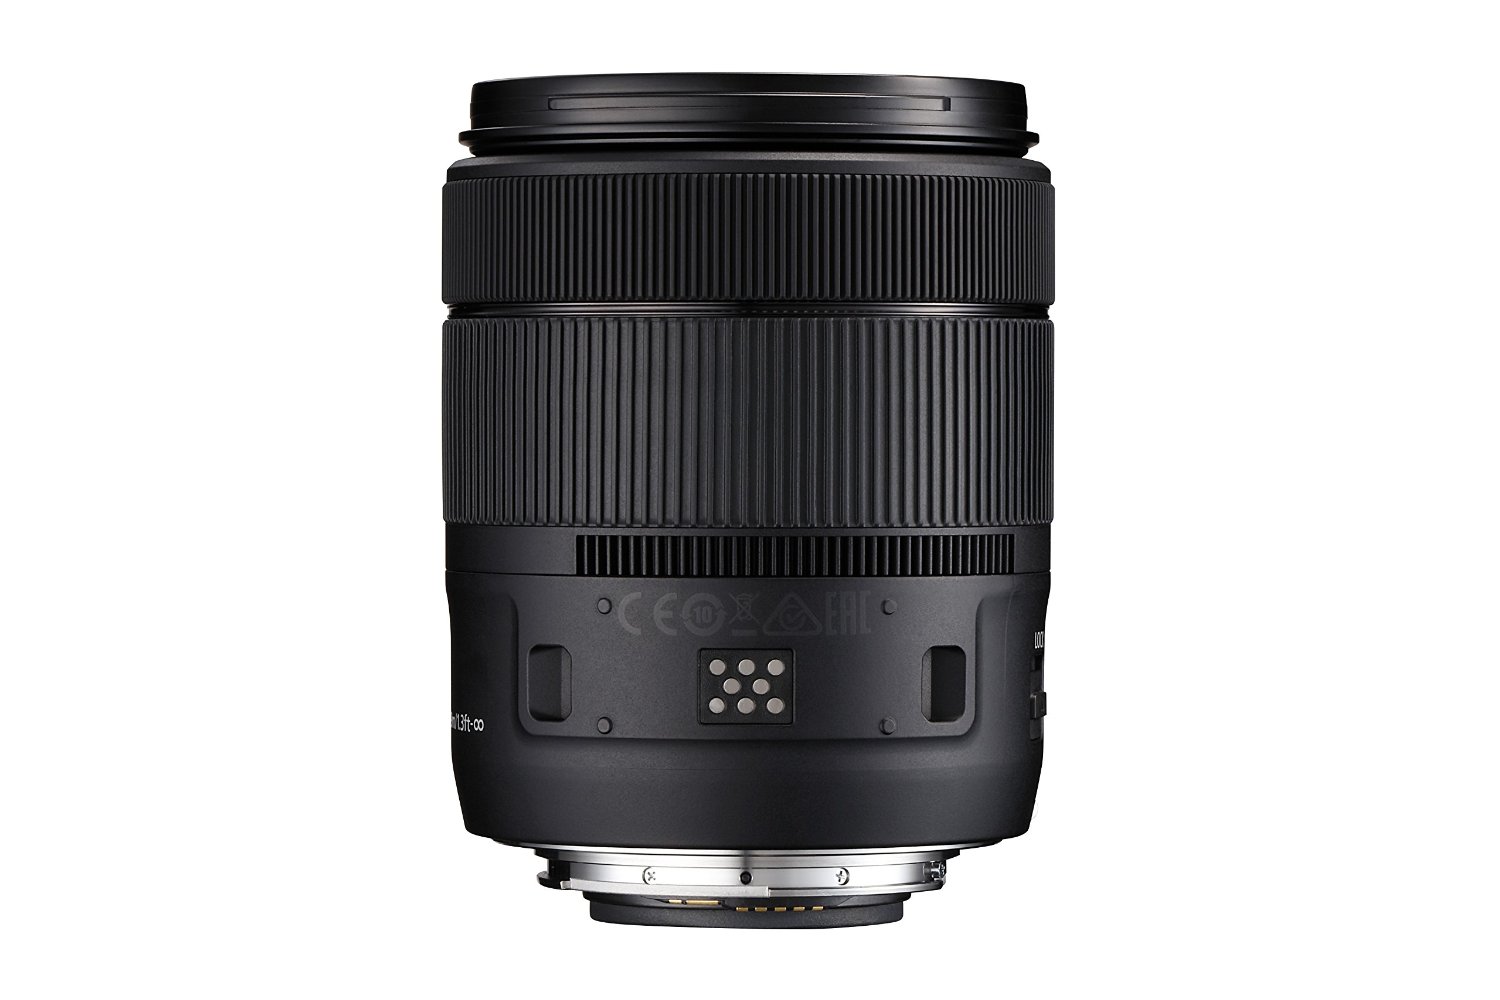 Canon EF-S 18-135mm f/3.5-5.6 IS USM Review